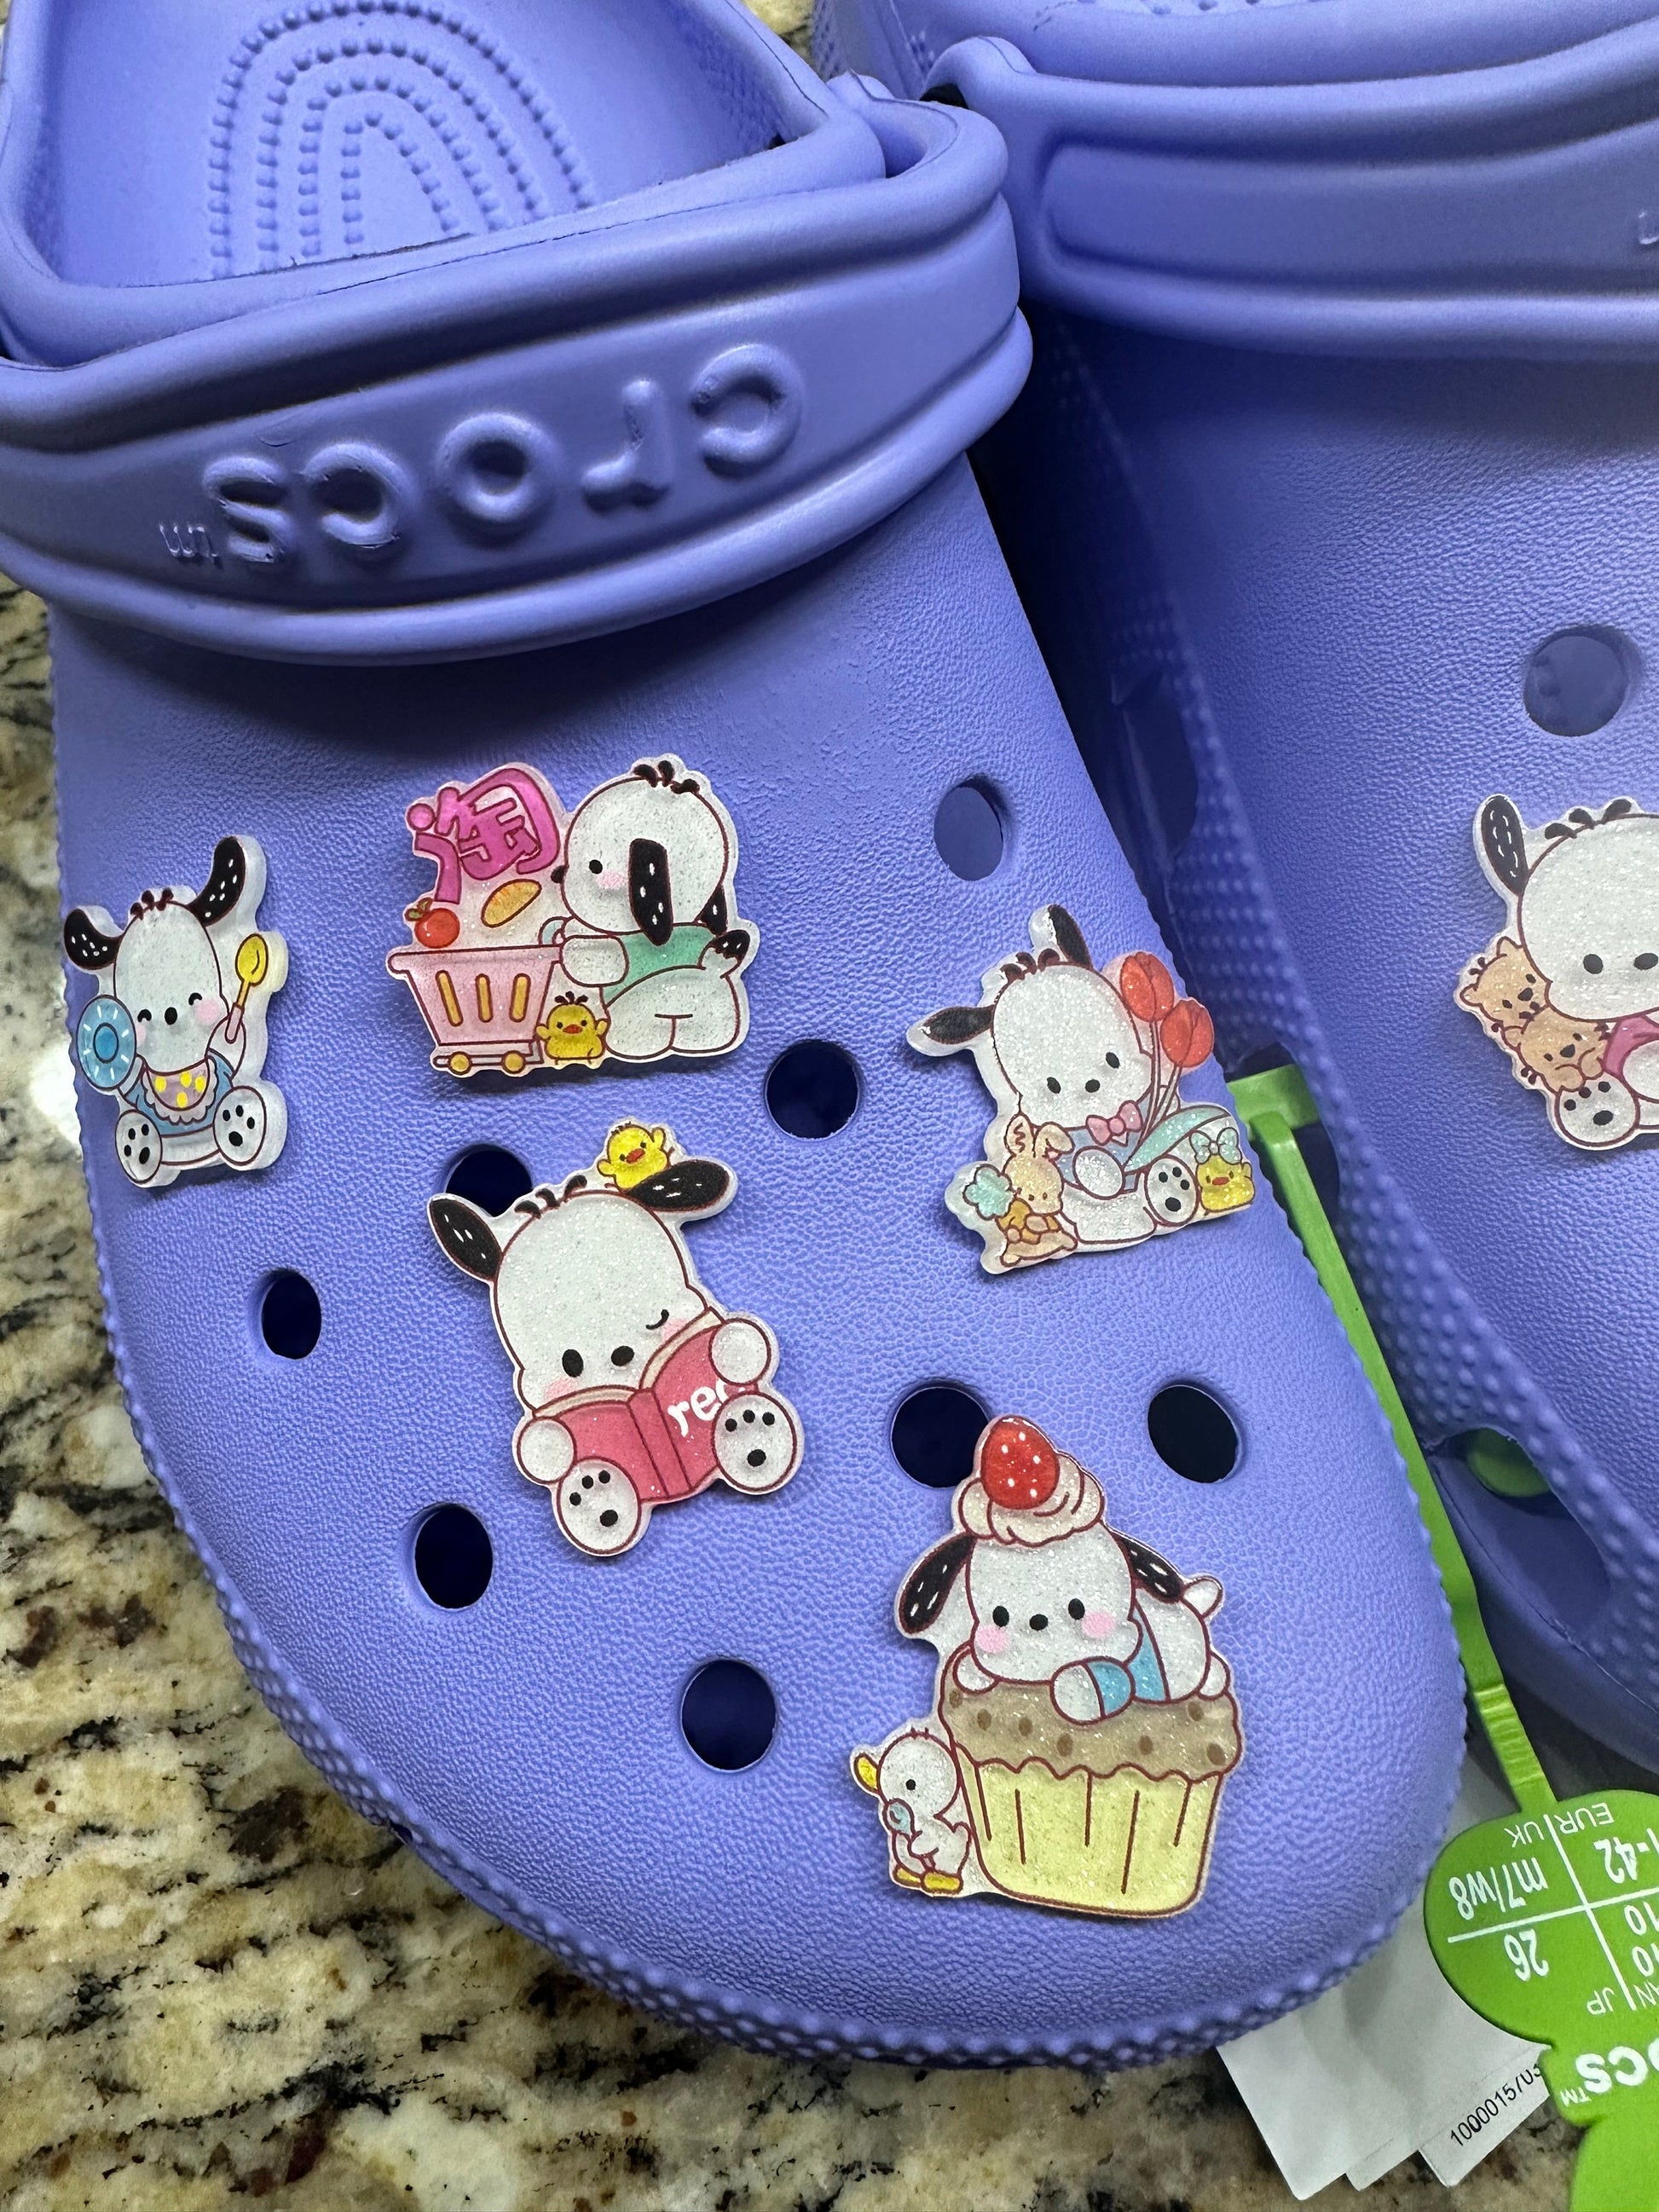 Pochaco shoe charms | Acrylic glitter charms | Flat glitter charms | Kawaii gifts | Cute shoe charms | White dog | 90's puppy |